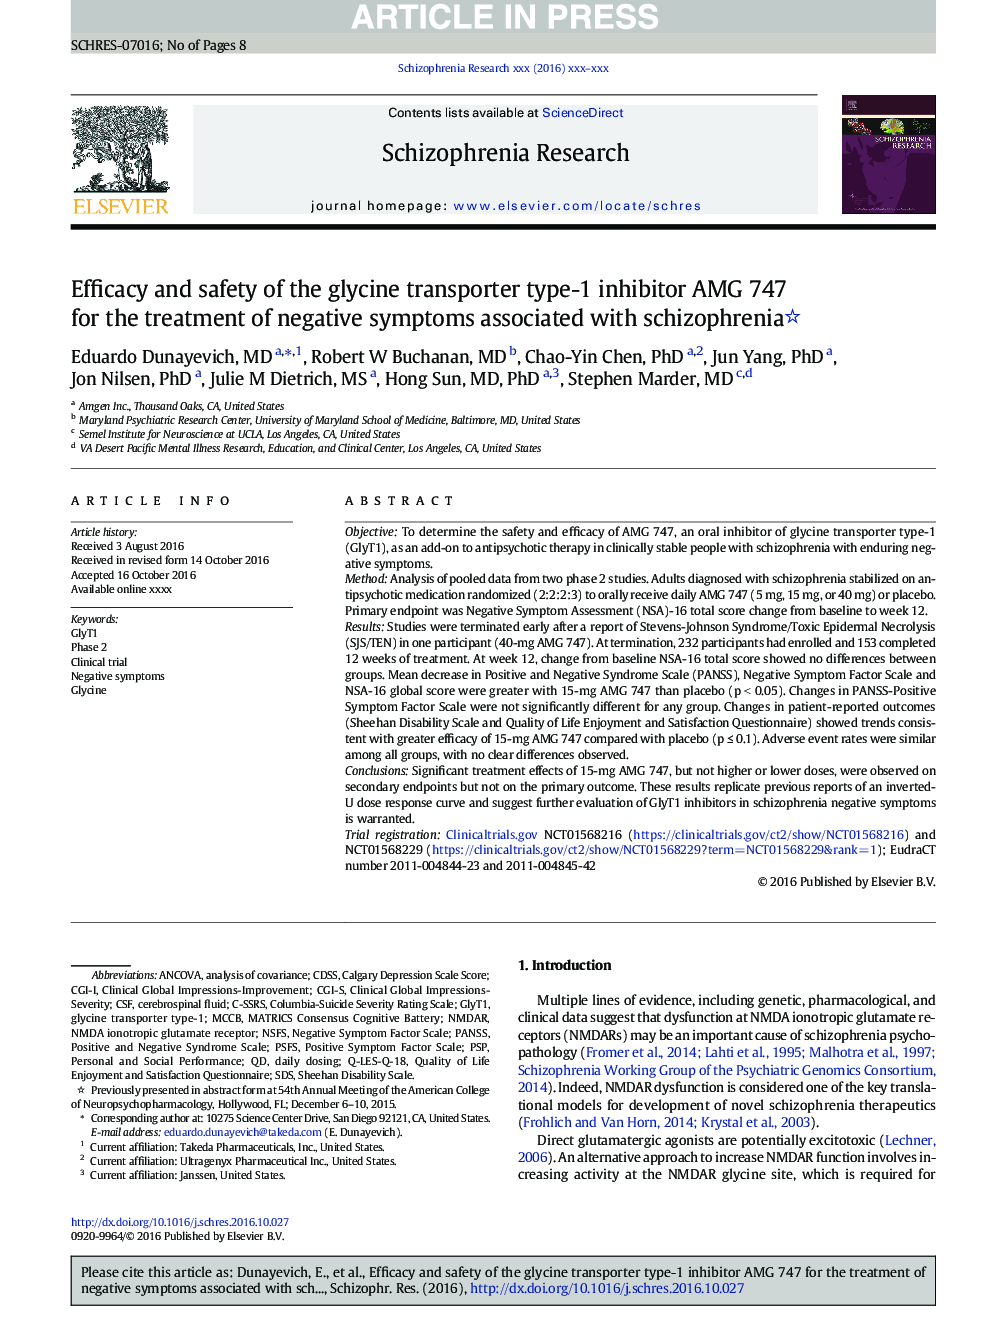 Efficacy and safety of the glycine transporter type-1 inhibitor AMG 747 for the treatment of negative symptoms associated with schizophrenia